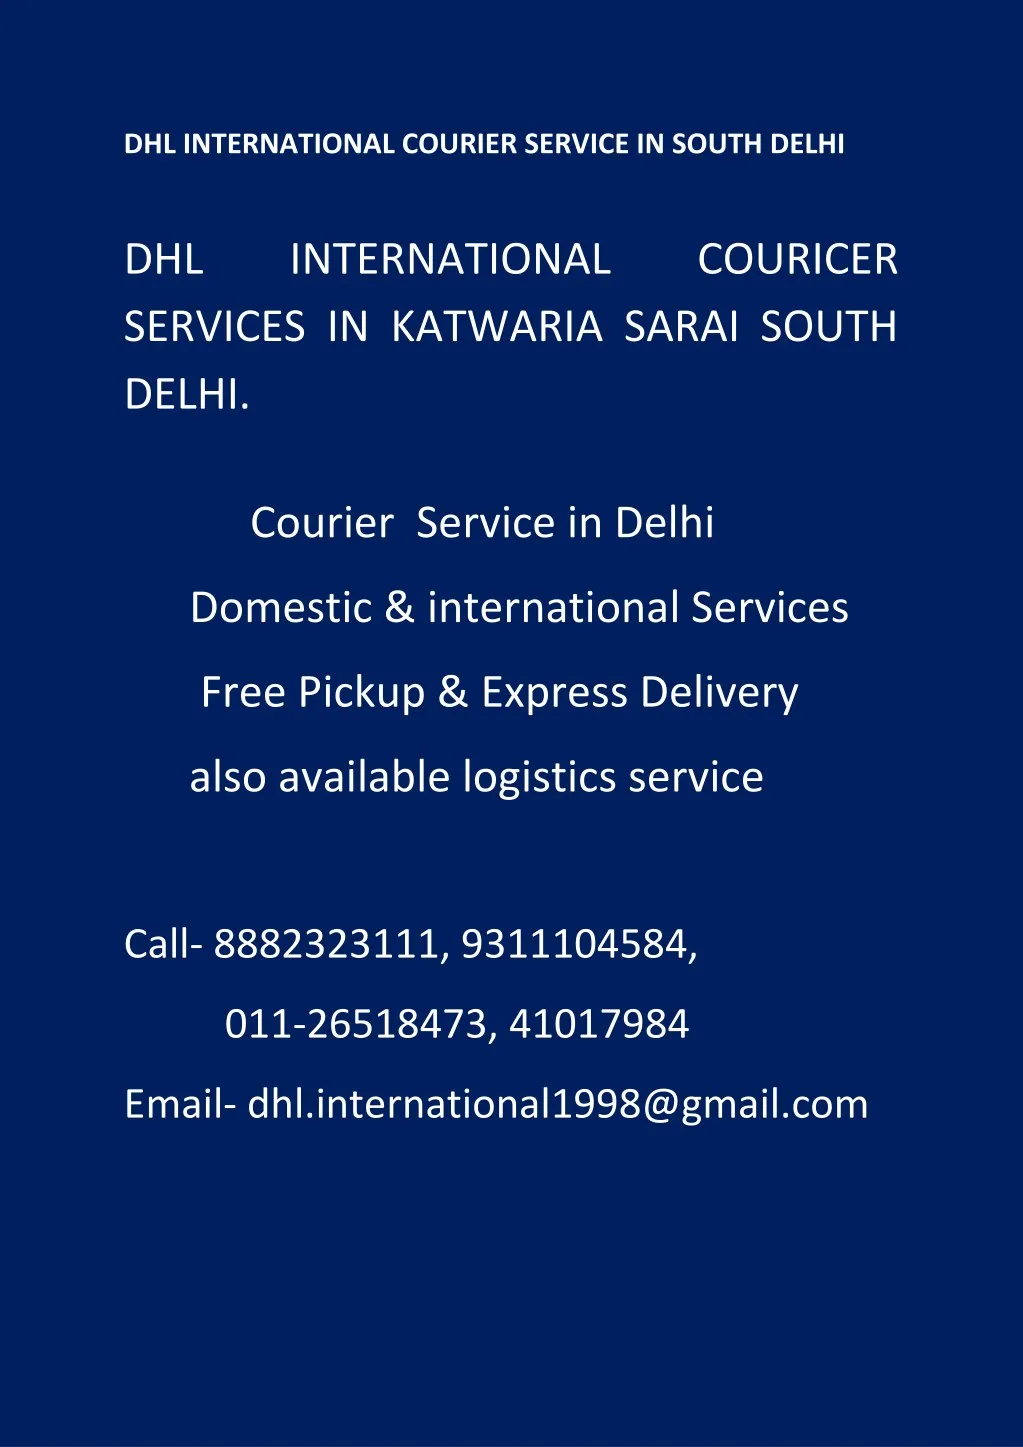 dhl international courier service in south delhi n.